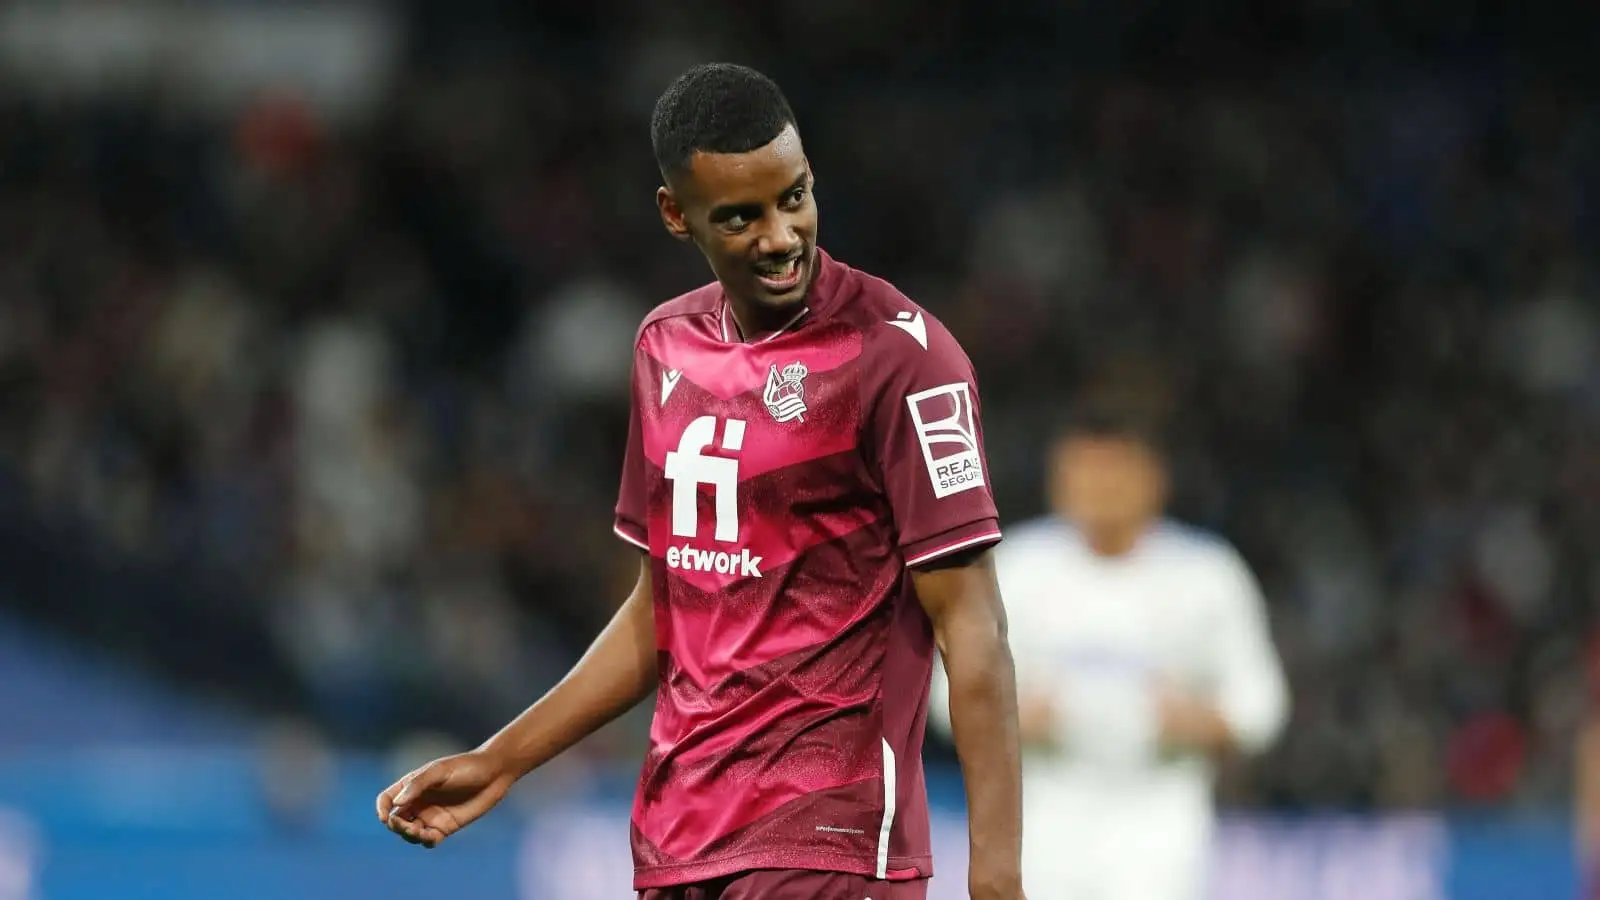 Newcastle confirm record transfer deal done for Alexander Isak; Eddie Howe ‘reluctant’ to lose keeper